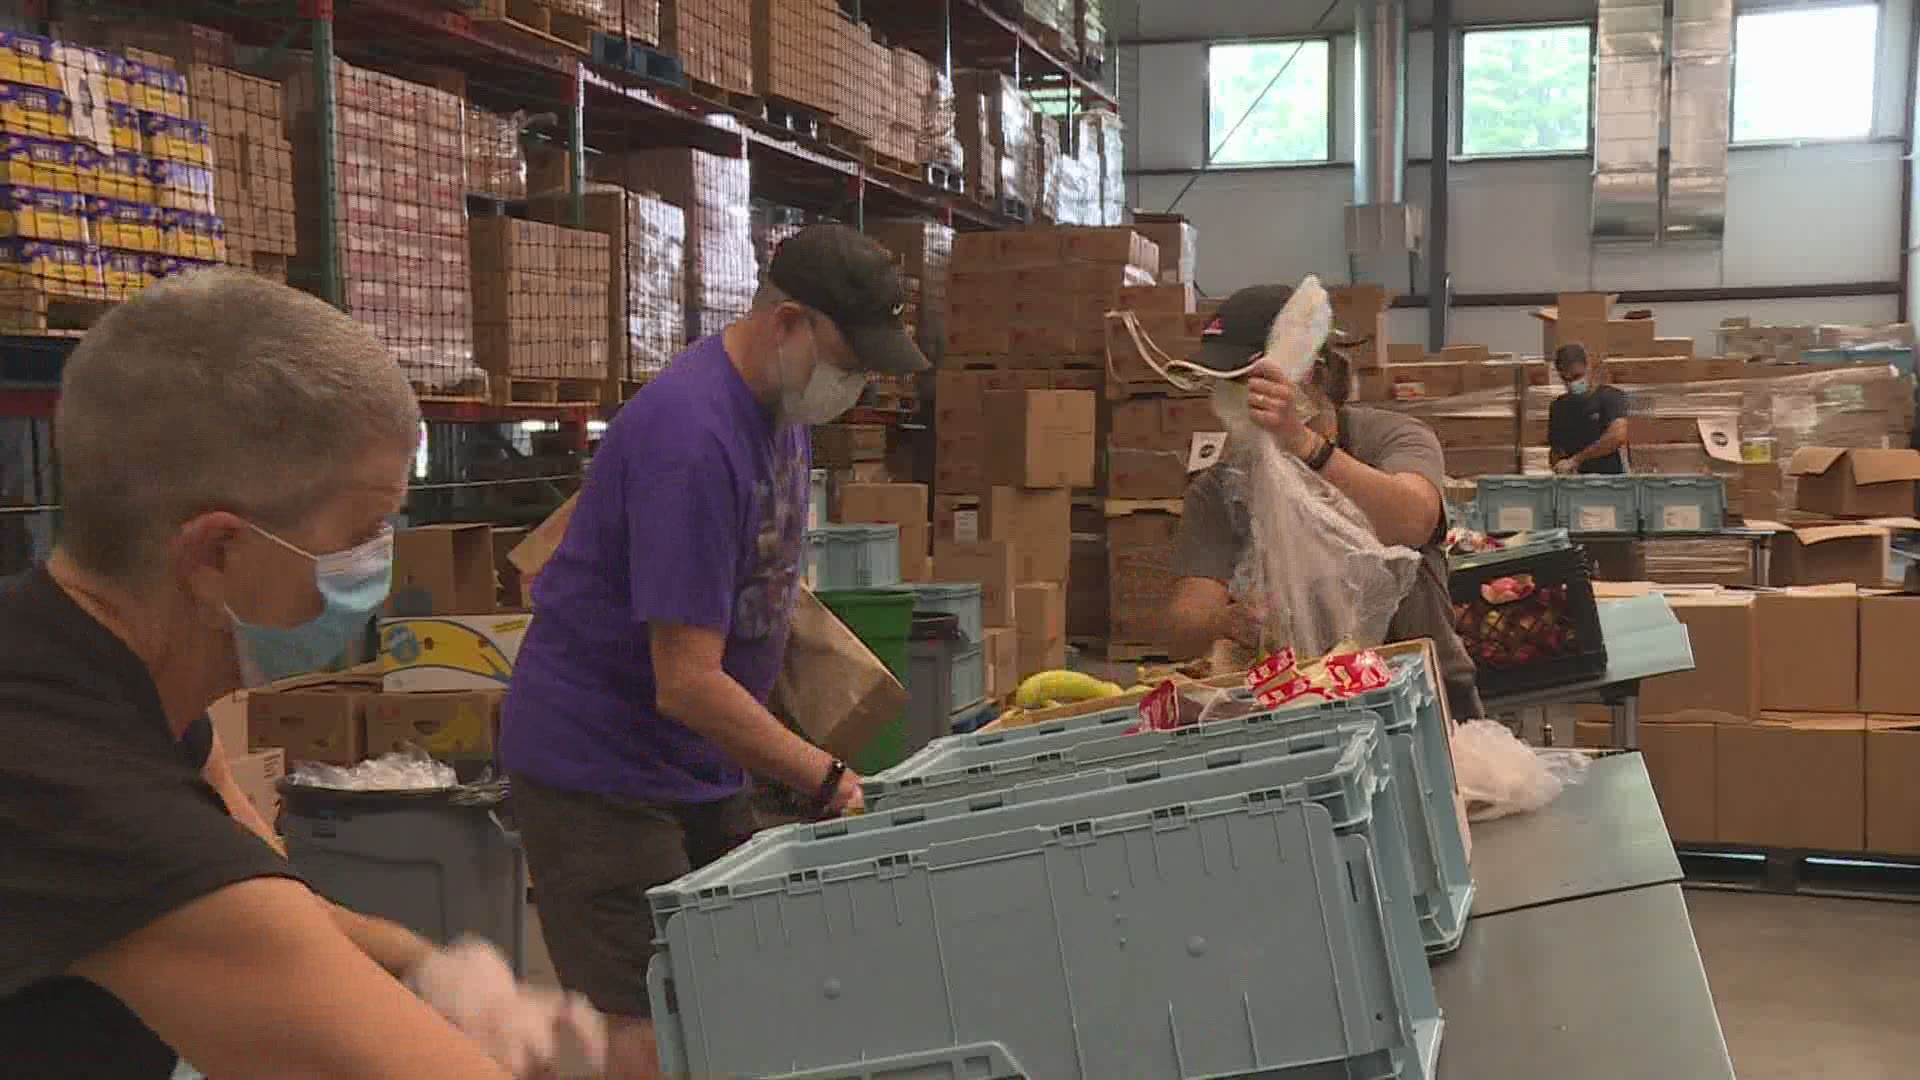 For nearly 2 decades, Kids' Food Basket has led the charge against childhood hunger here in West Michigan. This month, it's asking you to join the fight.